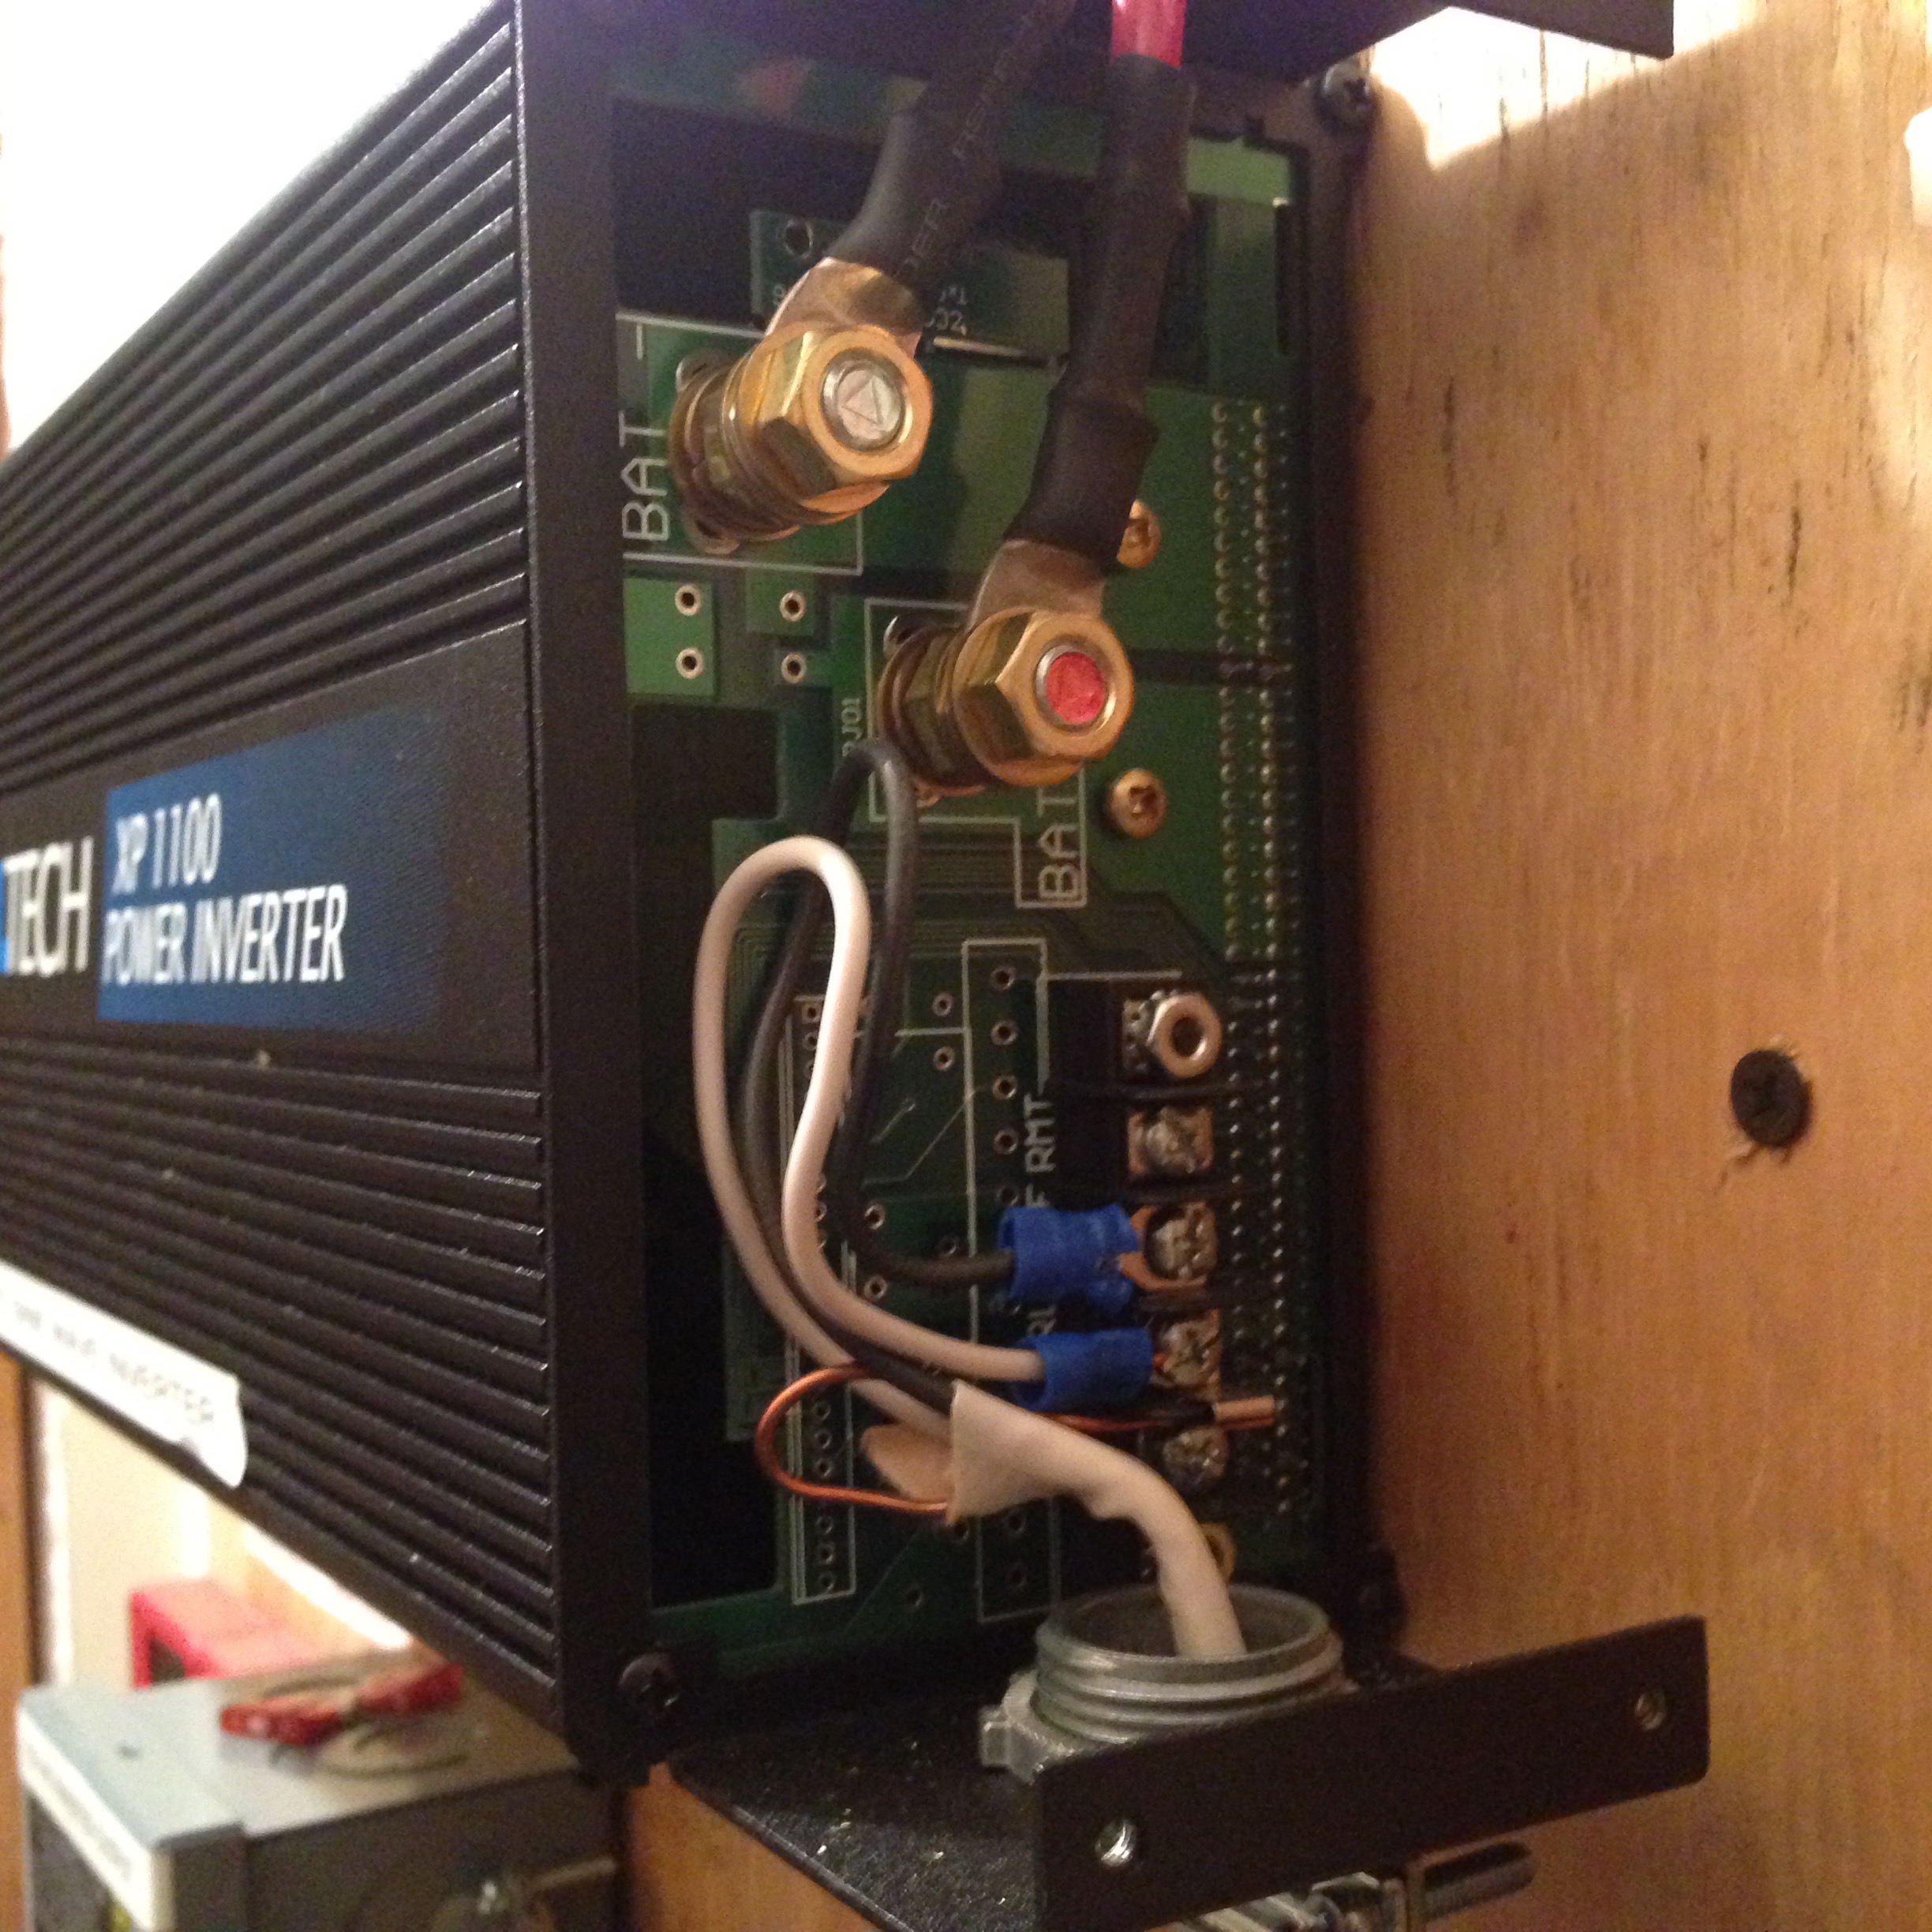 AC Inverters For Off Grid Power, Part 2 - Off Grid Ham